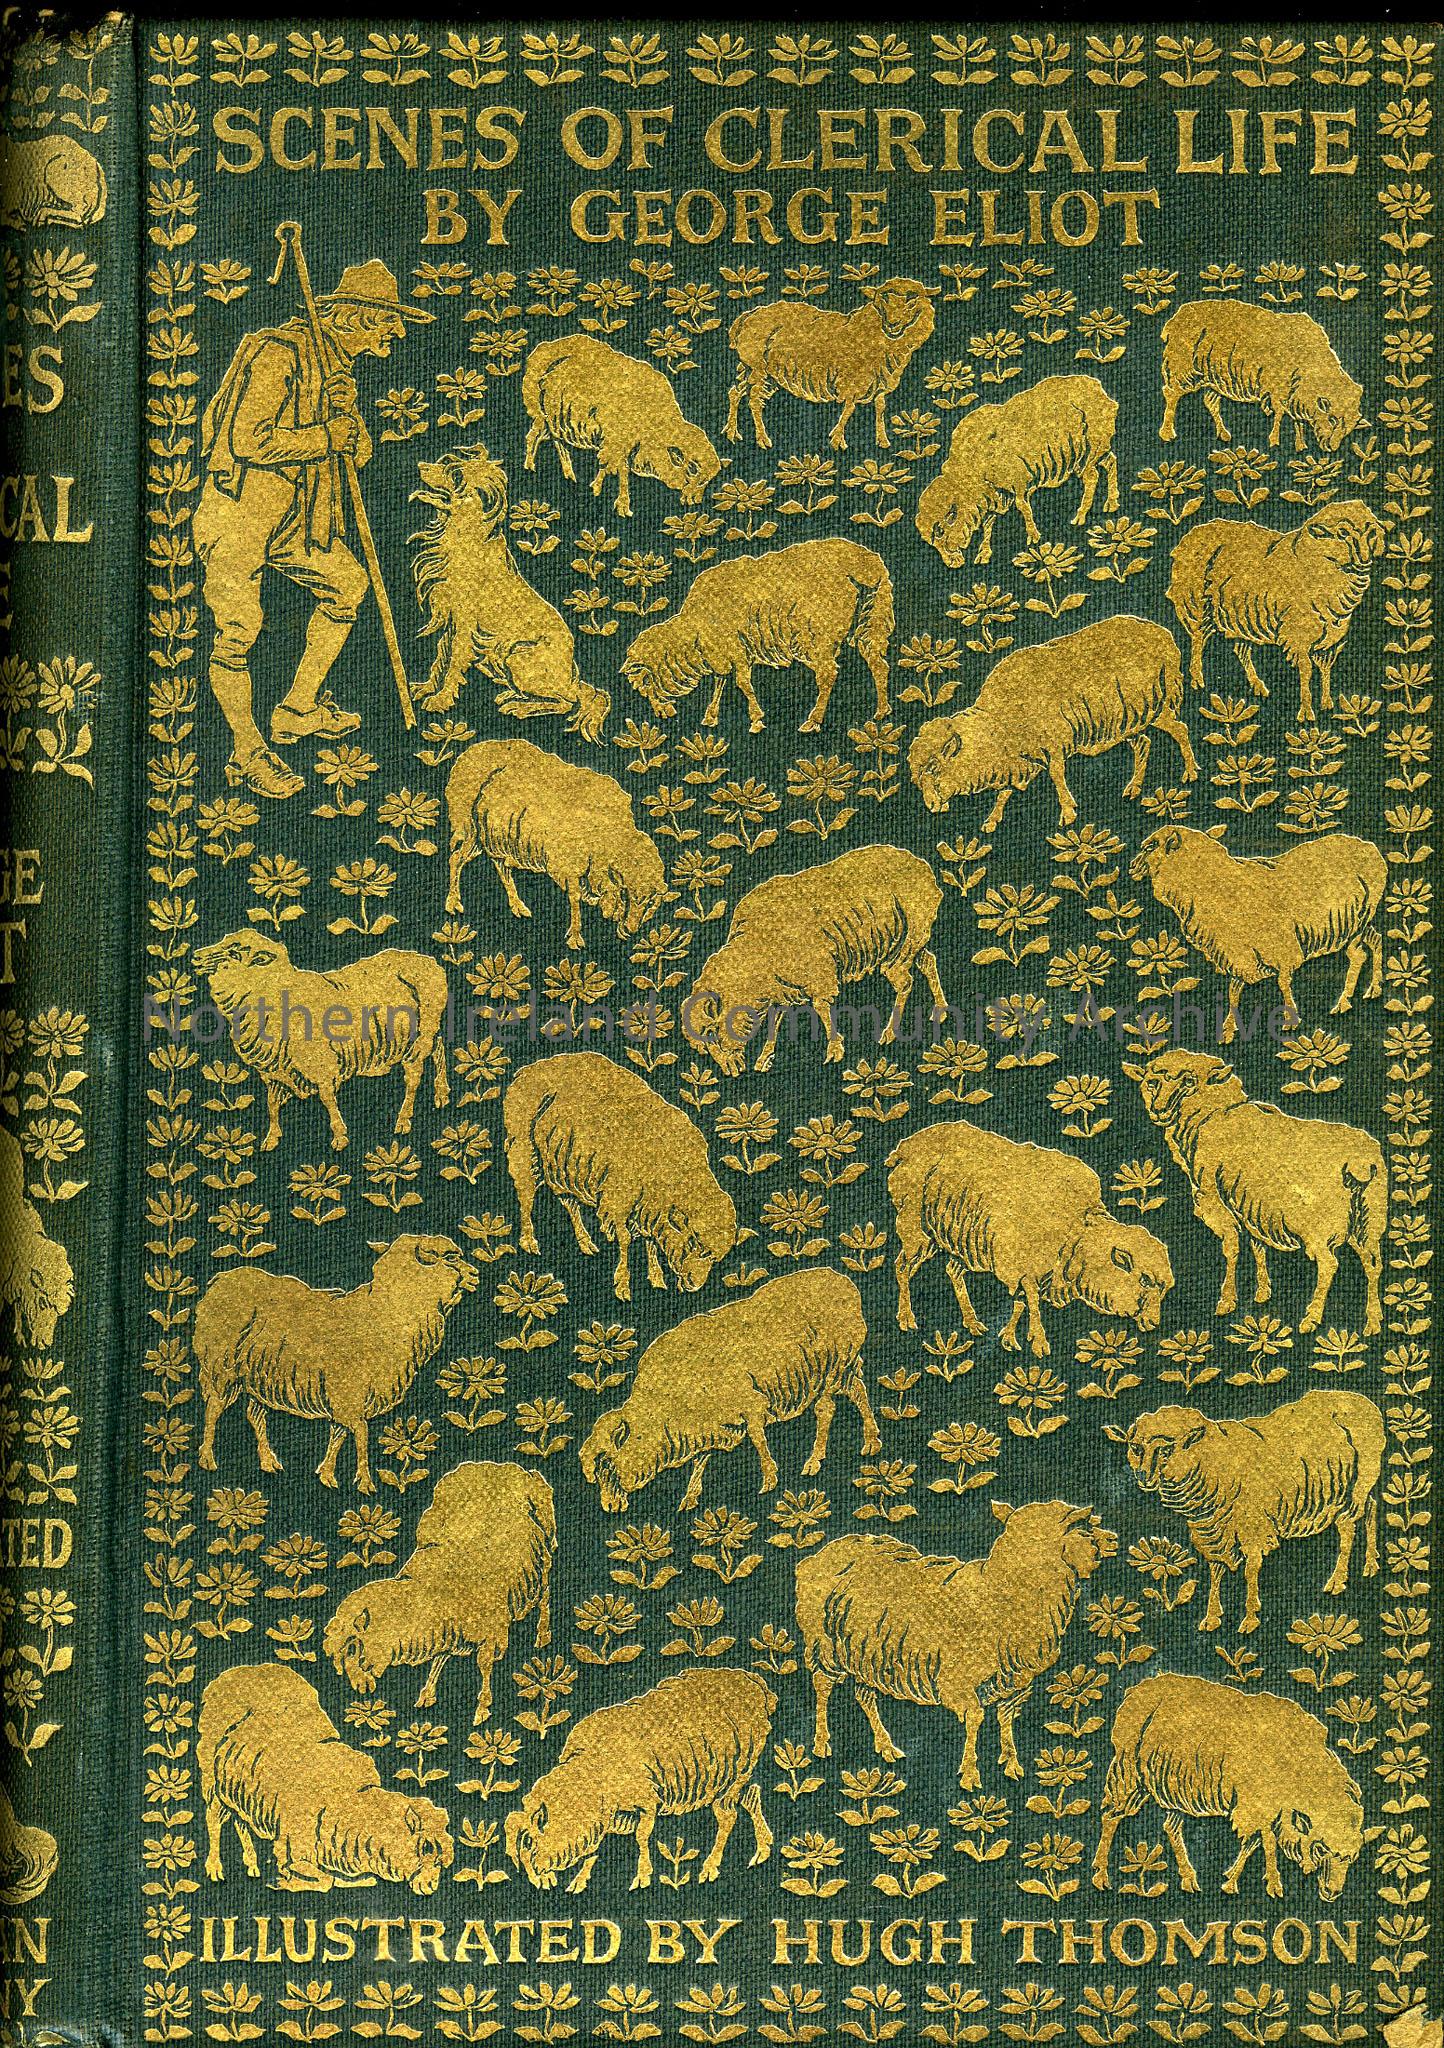 ‘Scenes of Clerical Life’ by George Eliot, illustrated by Hugh Thomson